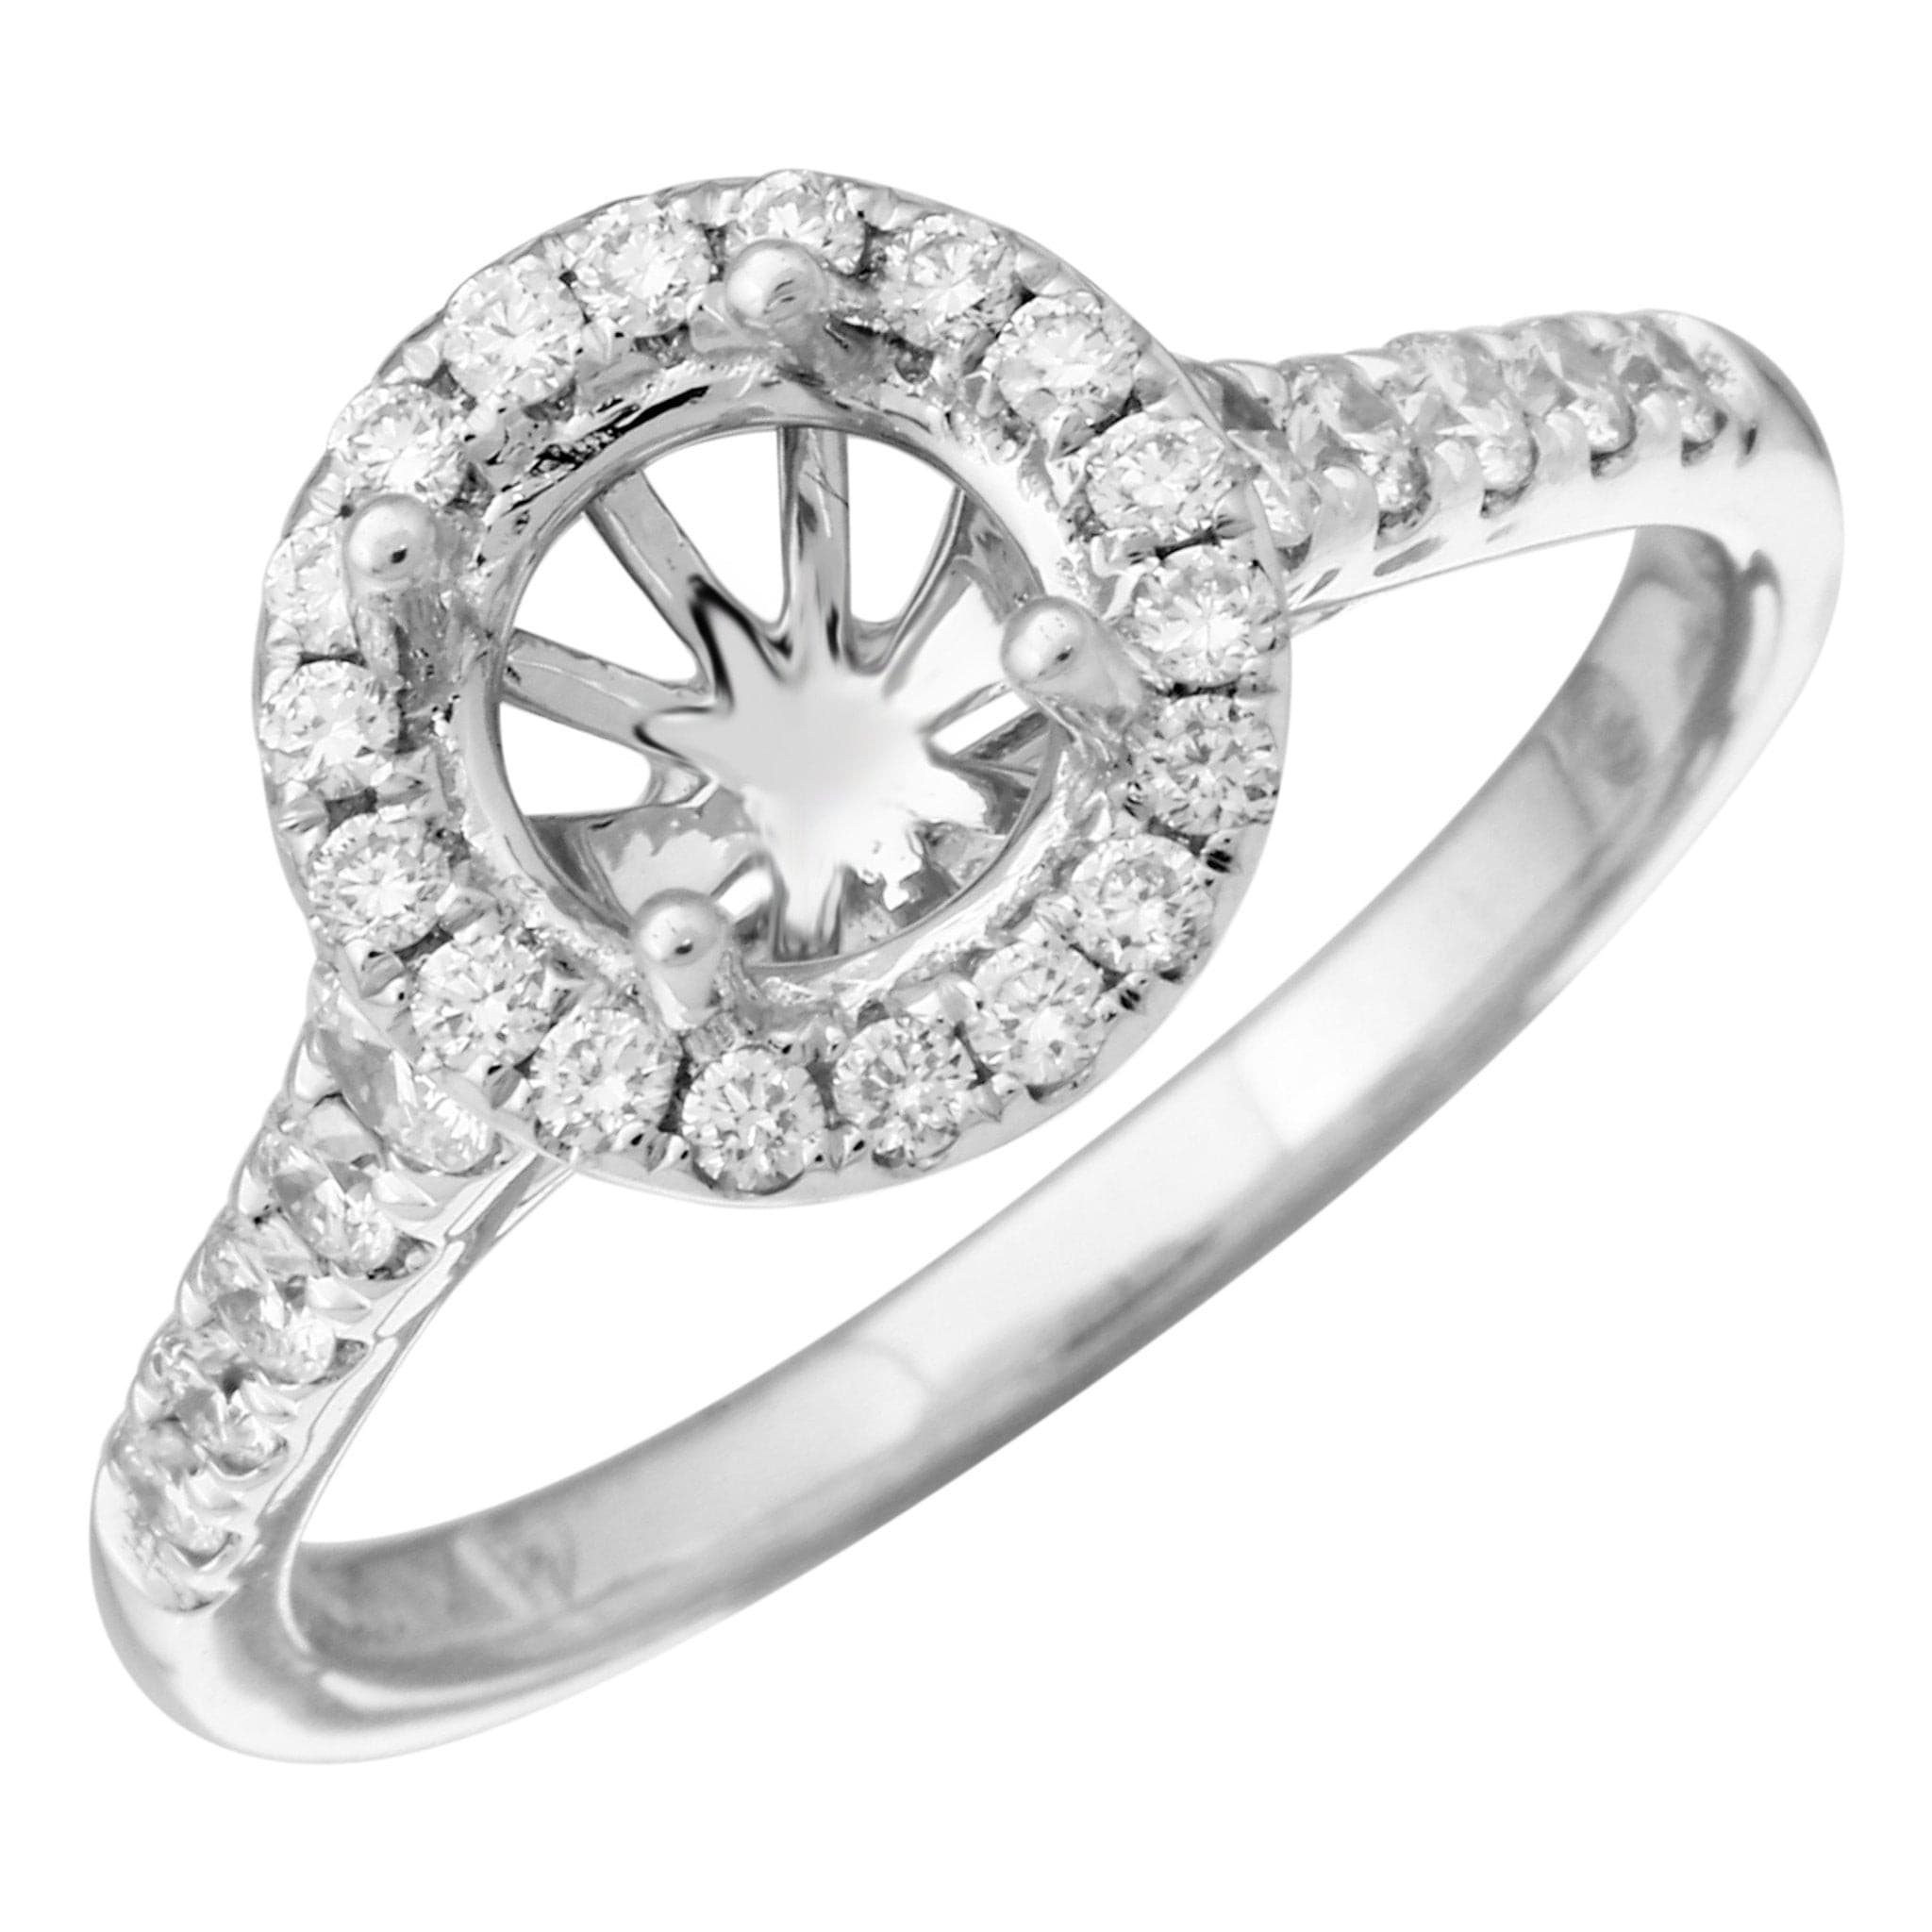 Blue Nile sale: Save 25% on engagement ring settings for a limited time -  Reviewed